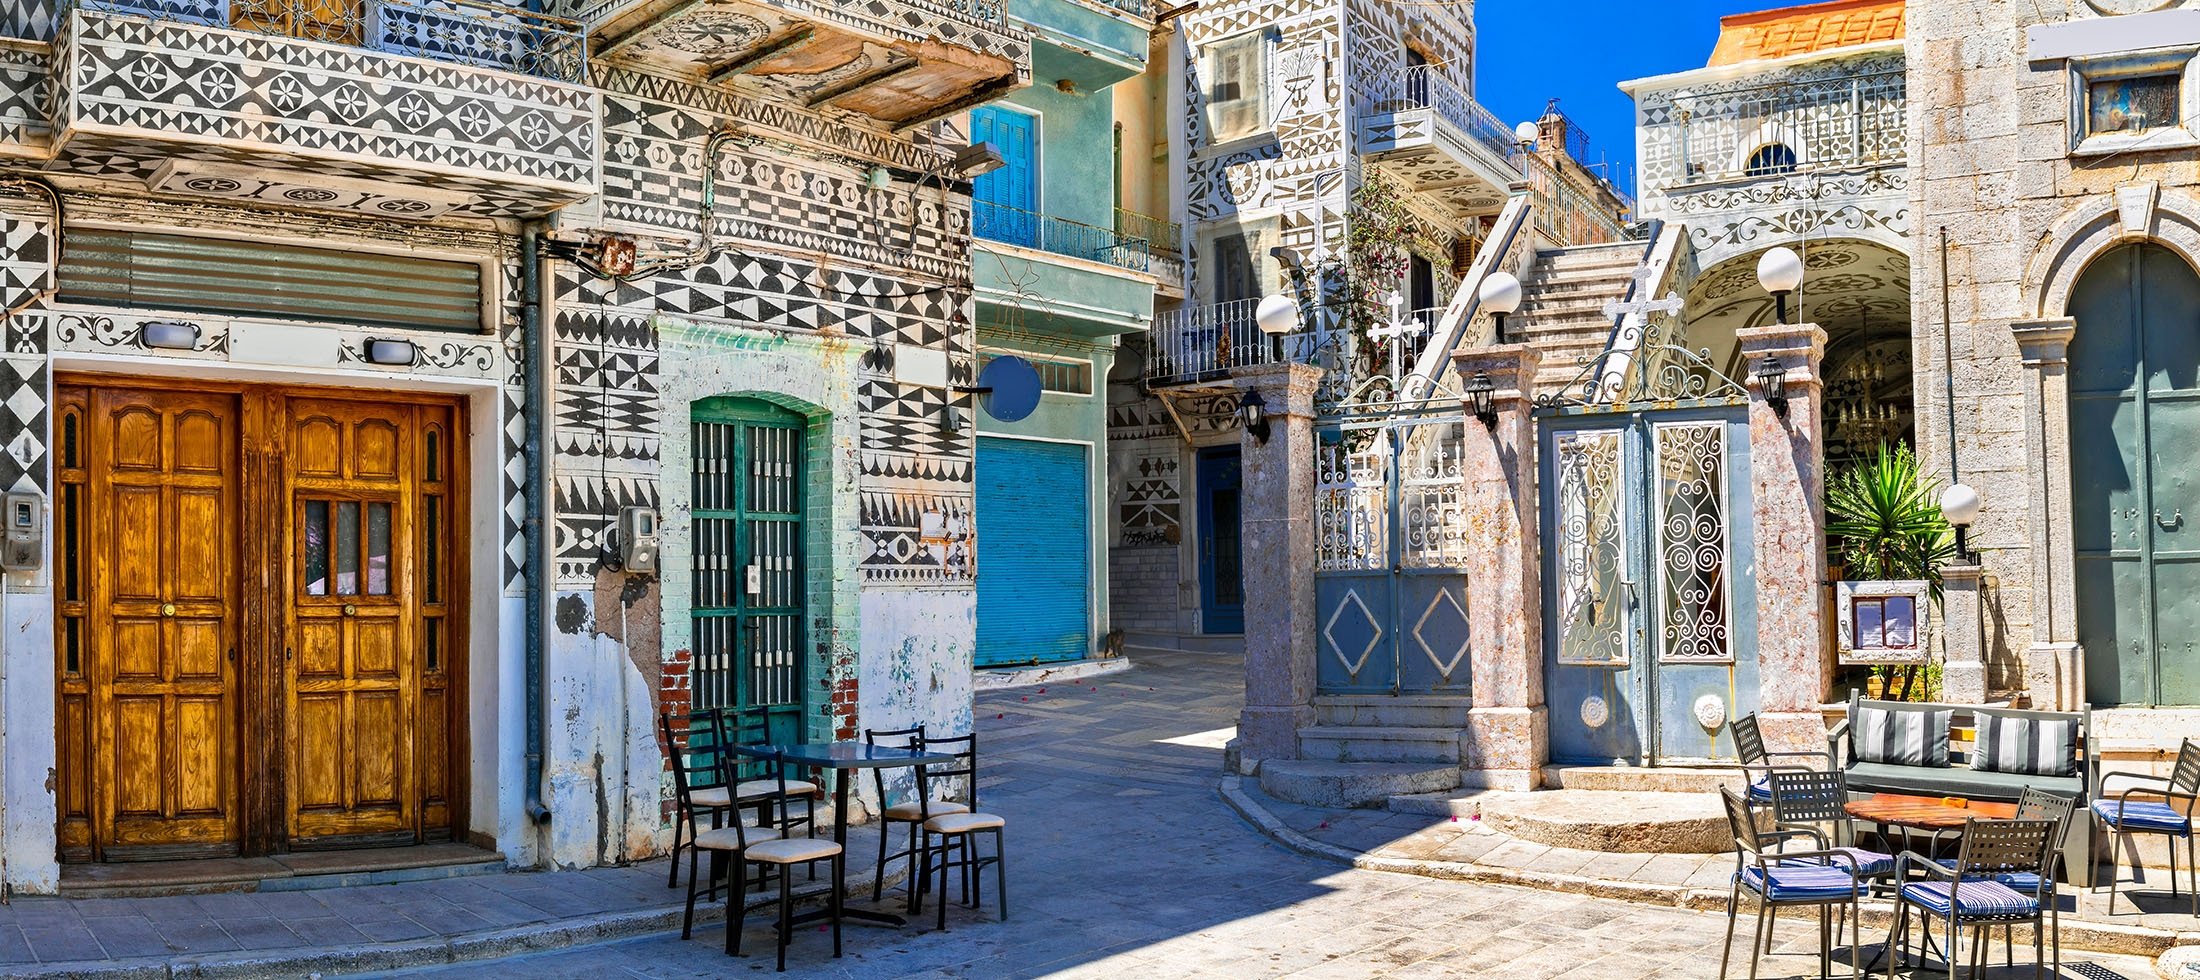 In Pyrgi, in Chios, the houses were built adjacent to each other in case of pirate attacks but now offer a visual feast from a touristic point of view. (Shutterstock Photo)